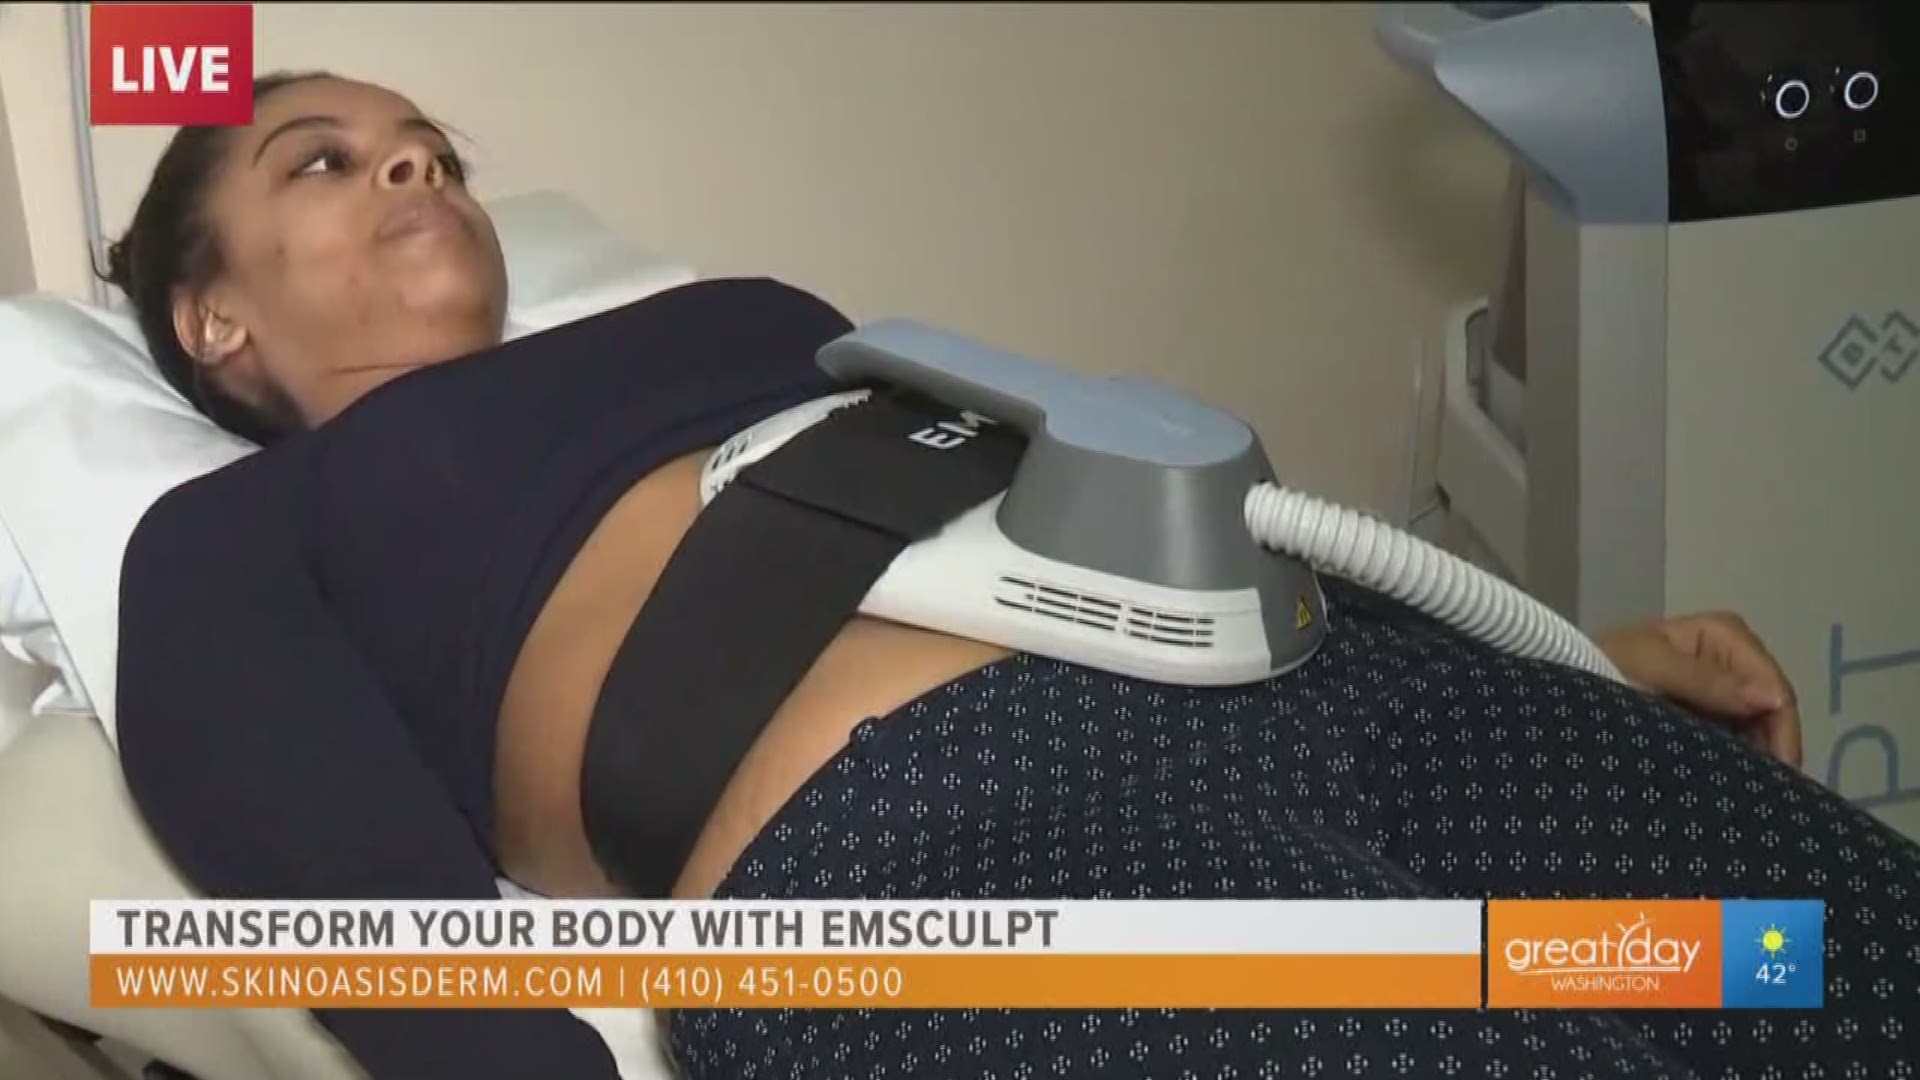 Get sculpted abs in minutes using Emsculpt from Skin Oasis Dermatology. For information call 410-451-0500 or visit www.SkinOasisDerm.com